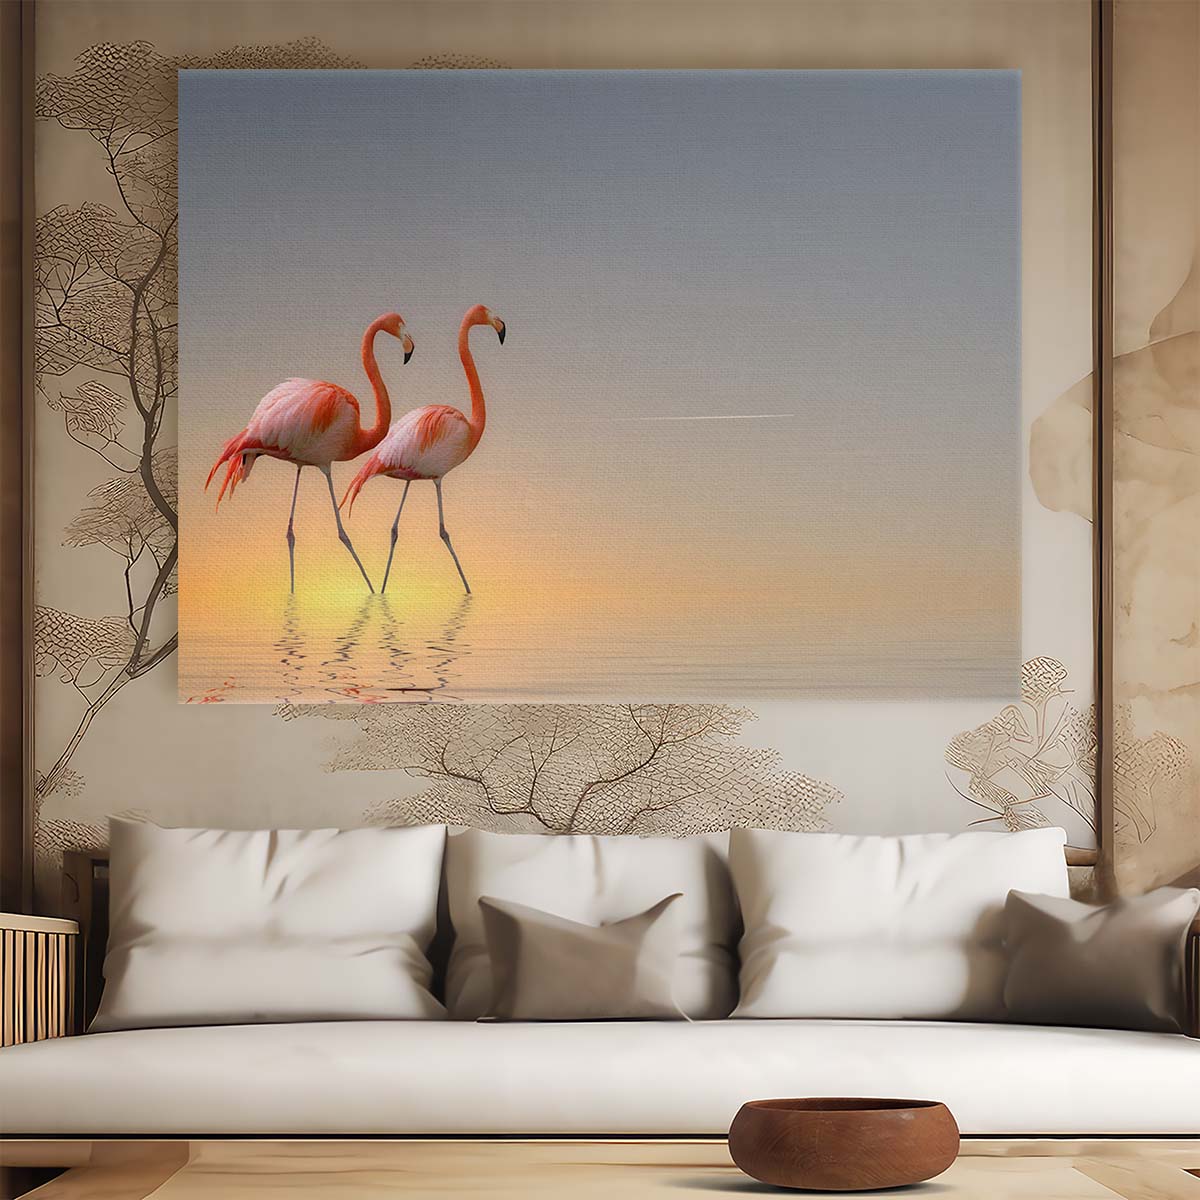 Romantic Flamingo Sunset Reflection Wall Art by Luxuriance Designs. Made in USA.